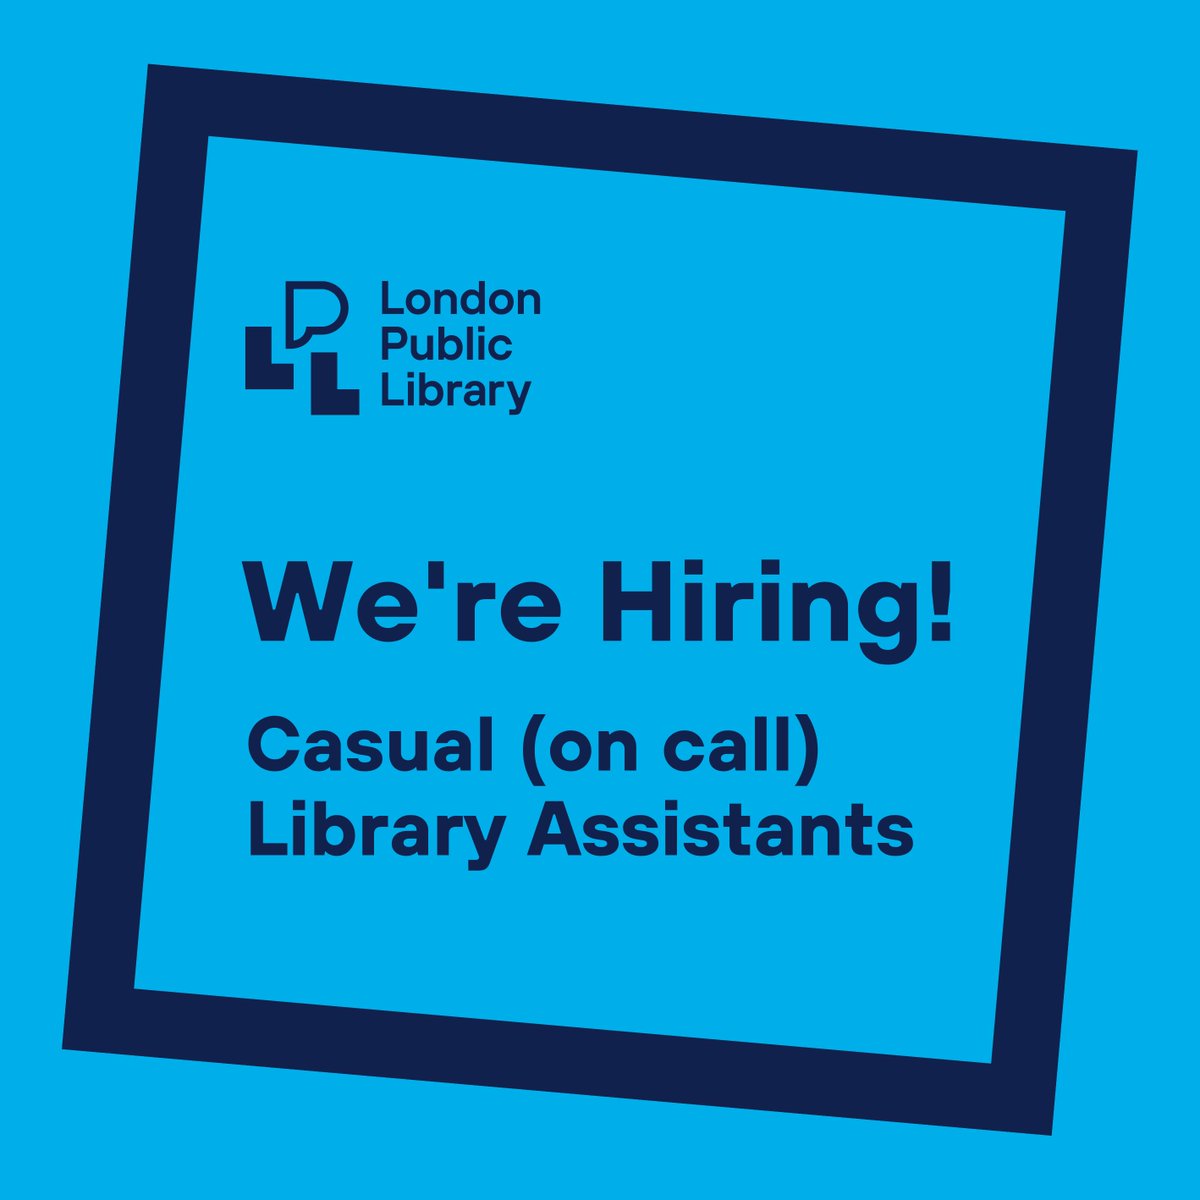 We're hiring Casual (on call) Library Assistants. Learn more and apply here: lpl.ca/casual-call-li…